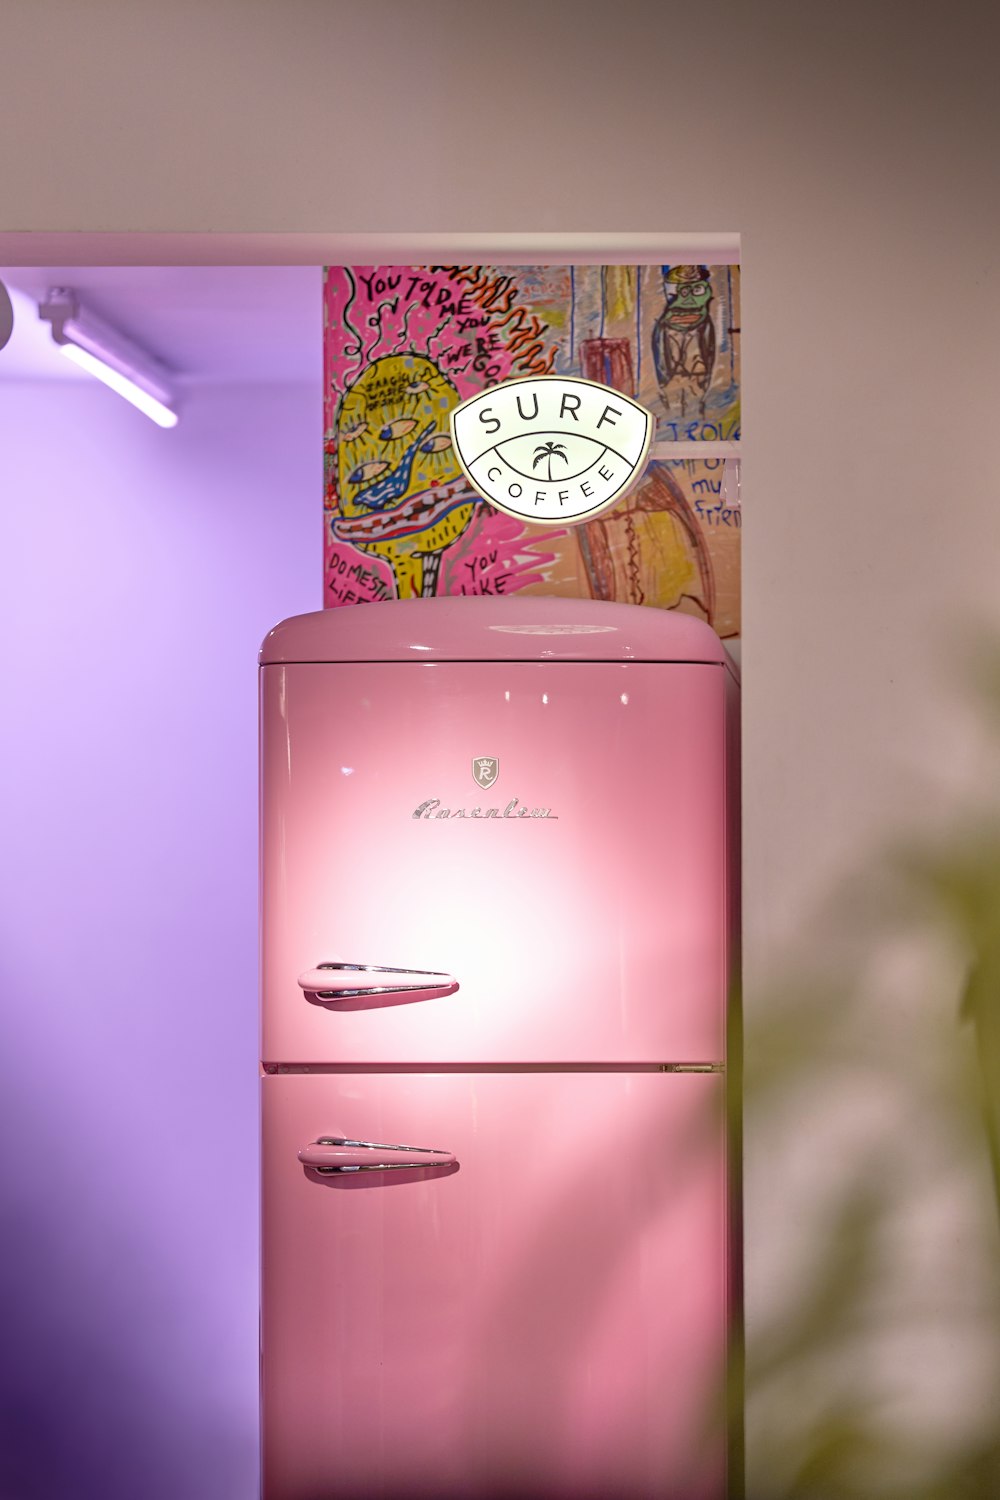 a pink refrigerator sitting in a kitchen next to a potted plant